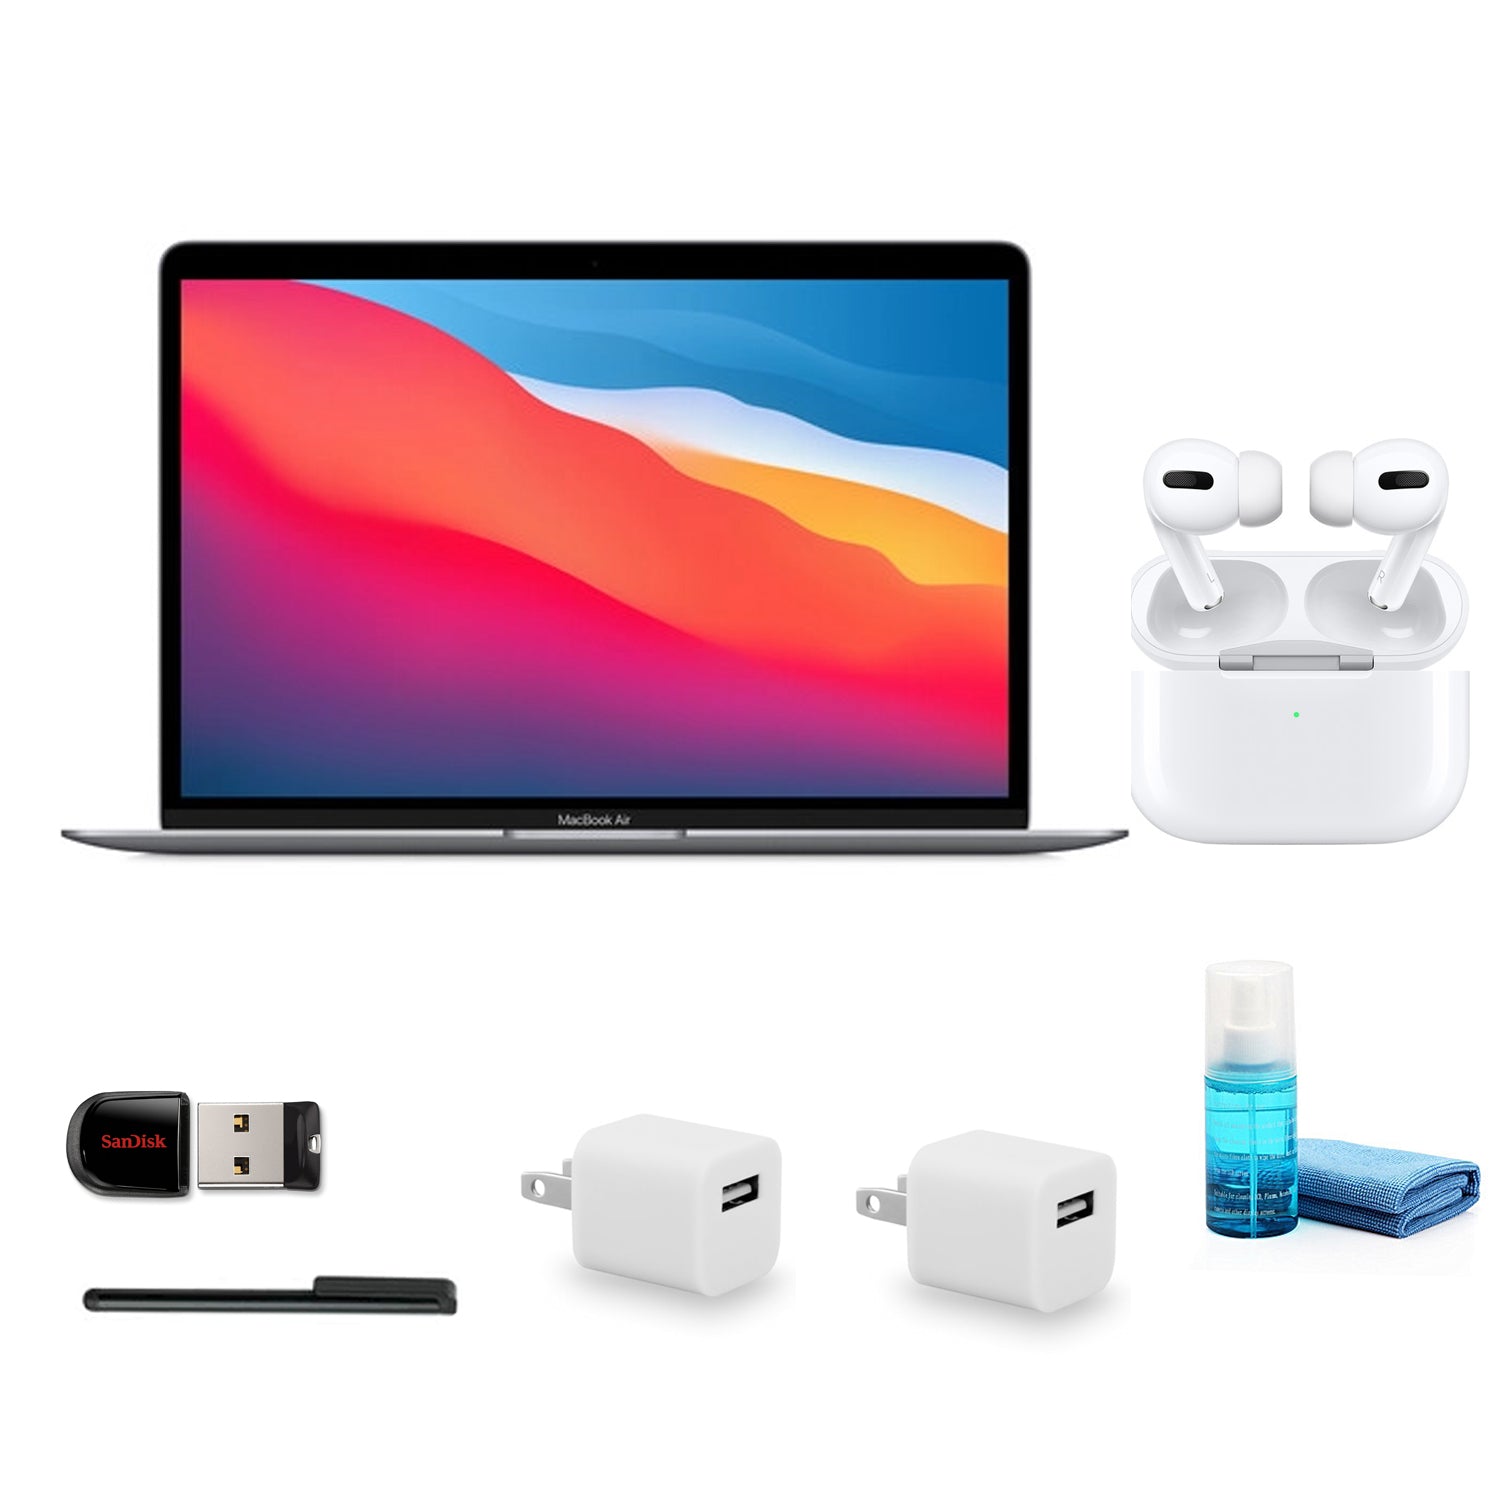 Apple MacBook Air 2020 13 Inch M1 Chip with Retina Display 256GB Silver Gray with Apple AirPods Pro